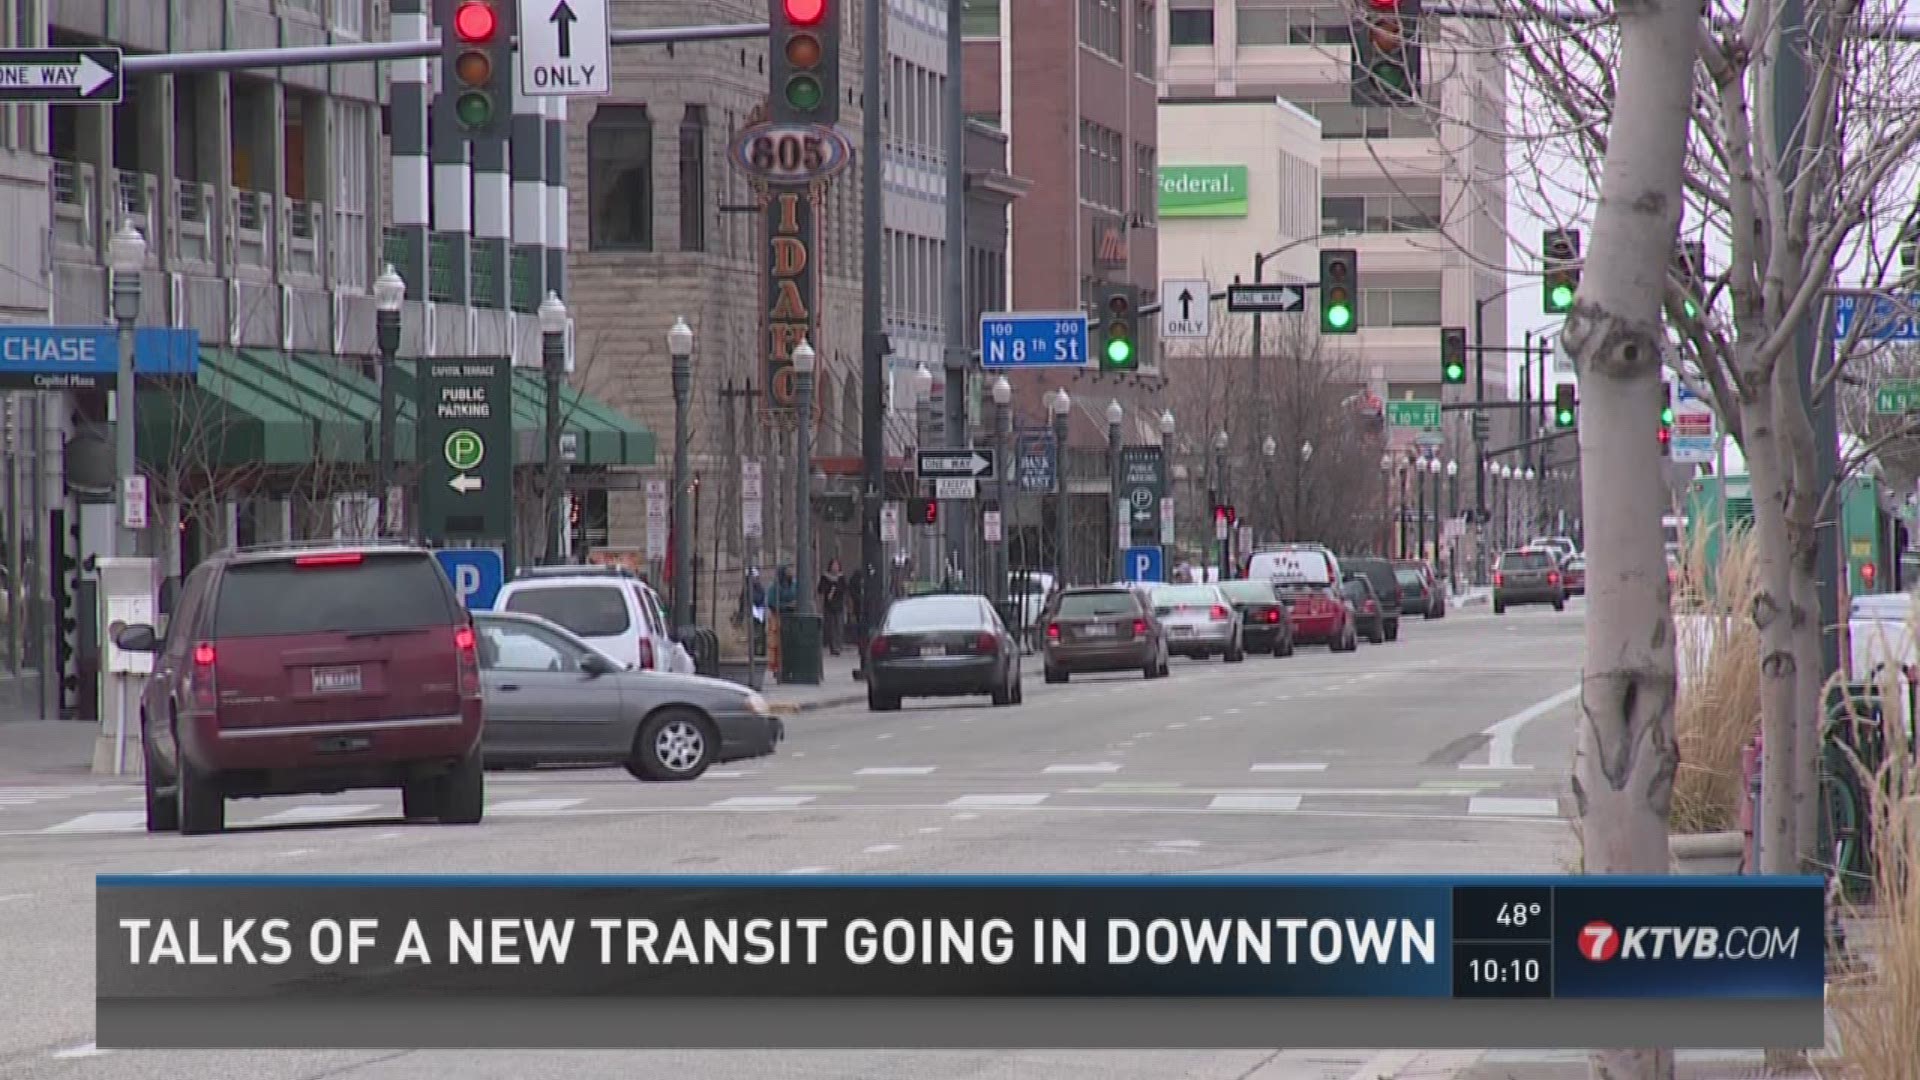 Talks of new transit going in downtown.